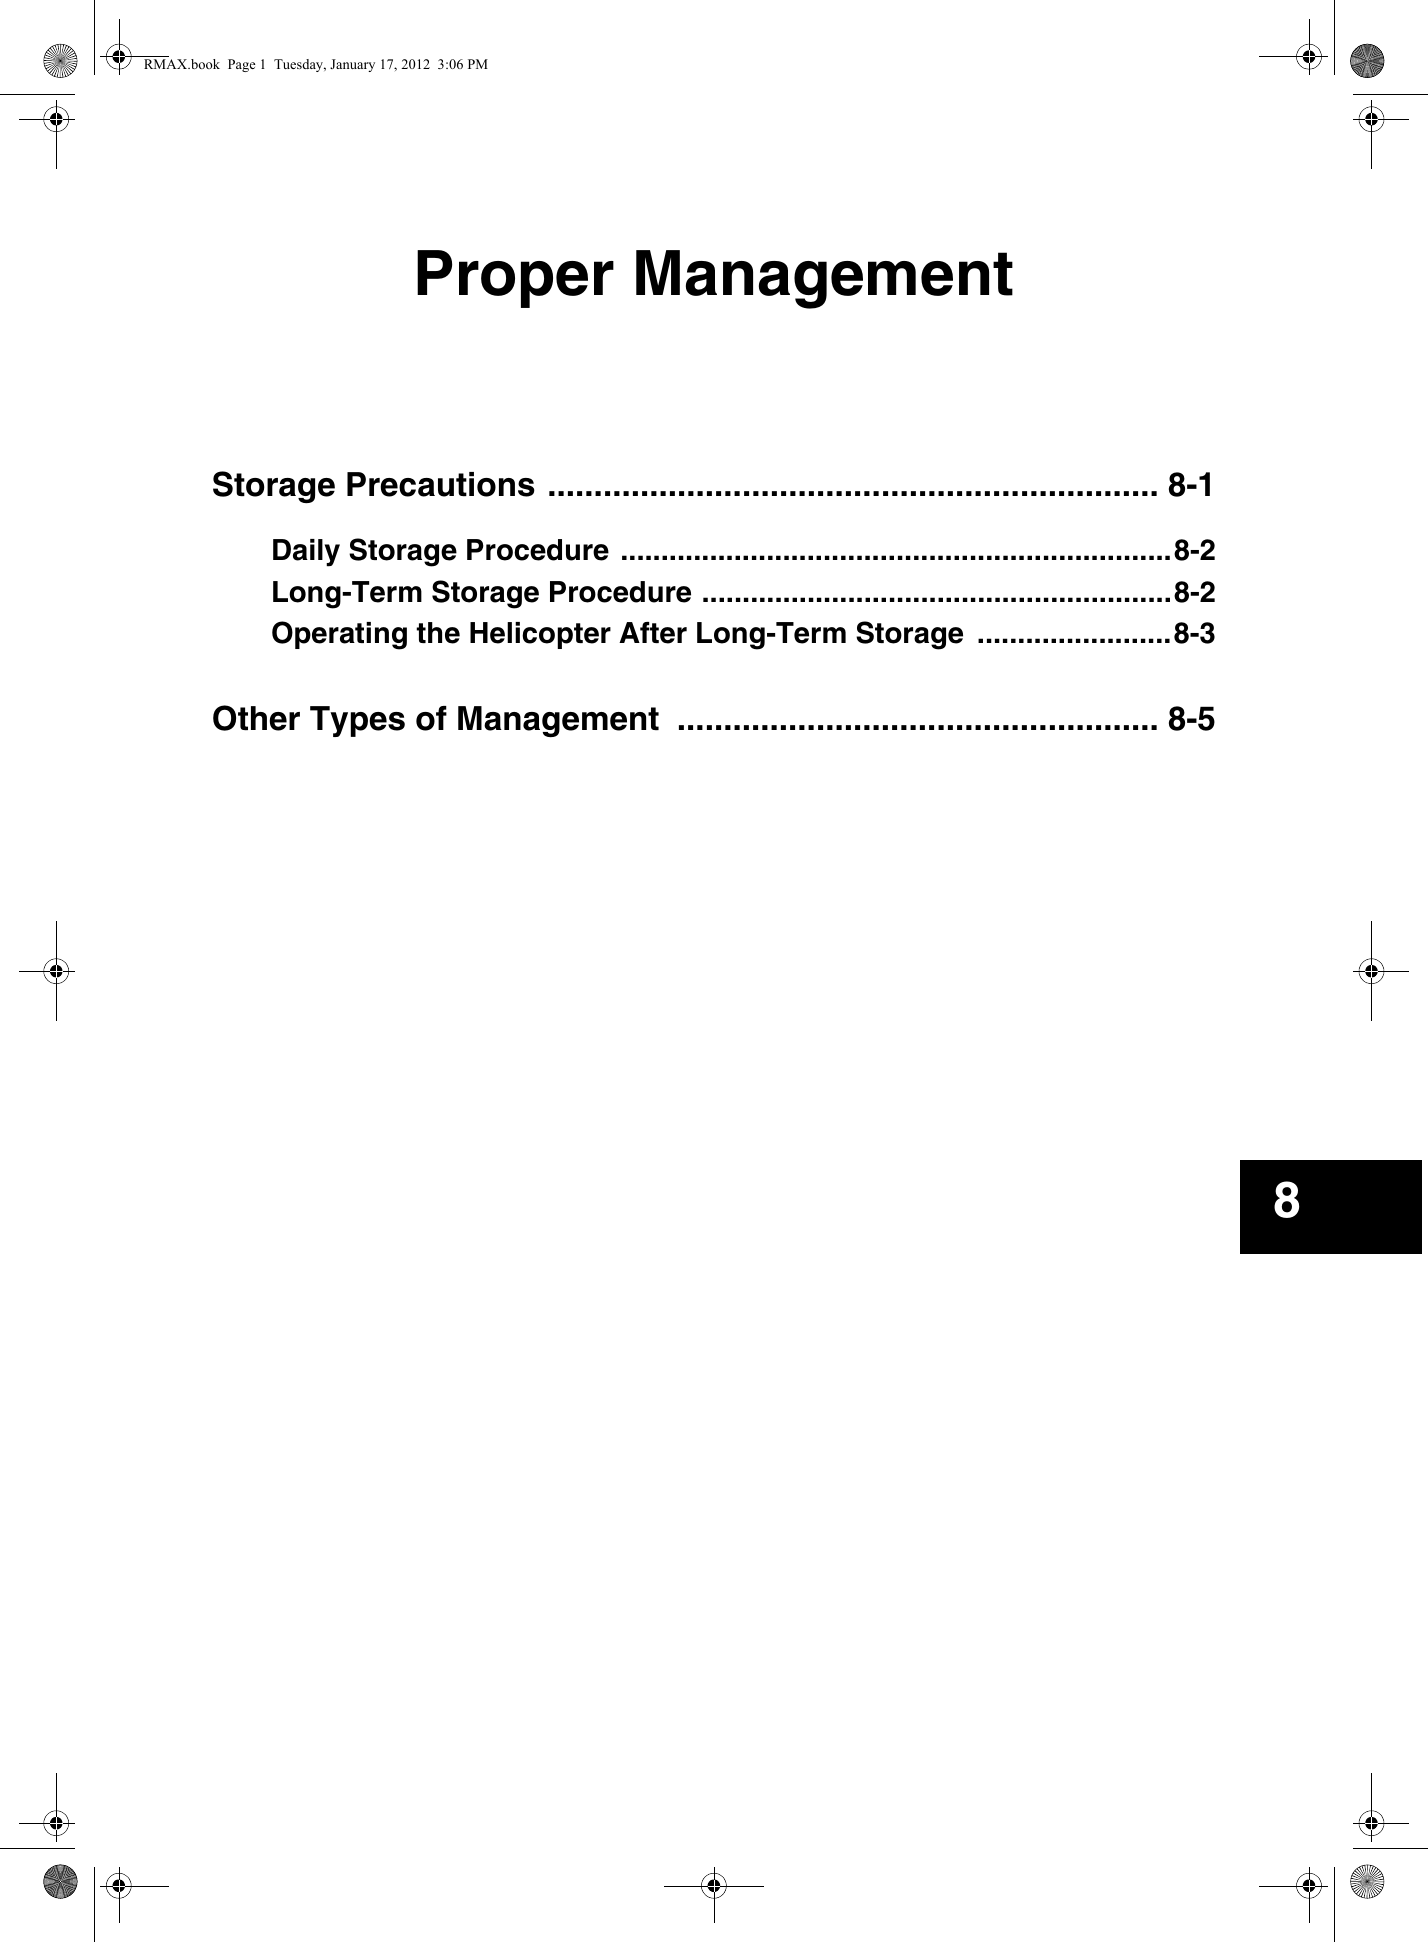 Proper ManagementStorage Precautions .................................................................. 8-1Daily Storage Procedure ....................................................................8-2Long-Term Storage Procedure ..........................................................8-2Operating the Helicopter After Long-Term Storage  ........................8-3Other Types of Management  .................................................... 8-58RMAX.book  Page 1  Tuesday, January 17, 2012  3:06 PM